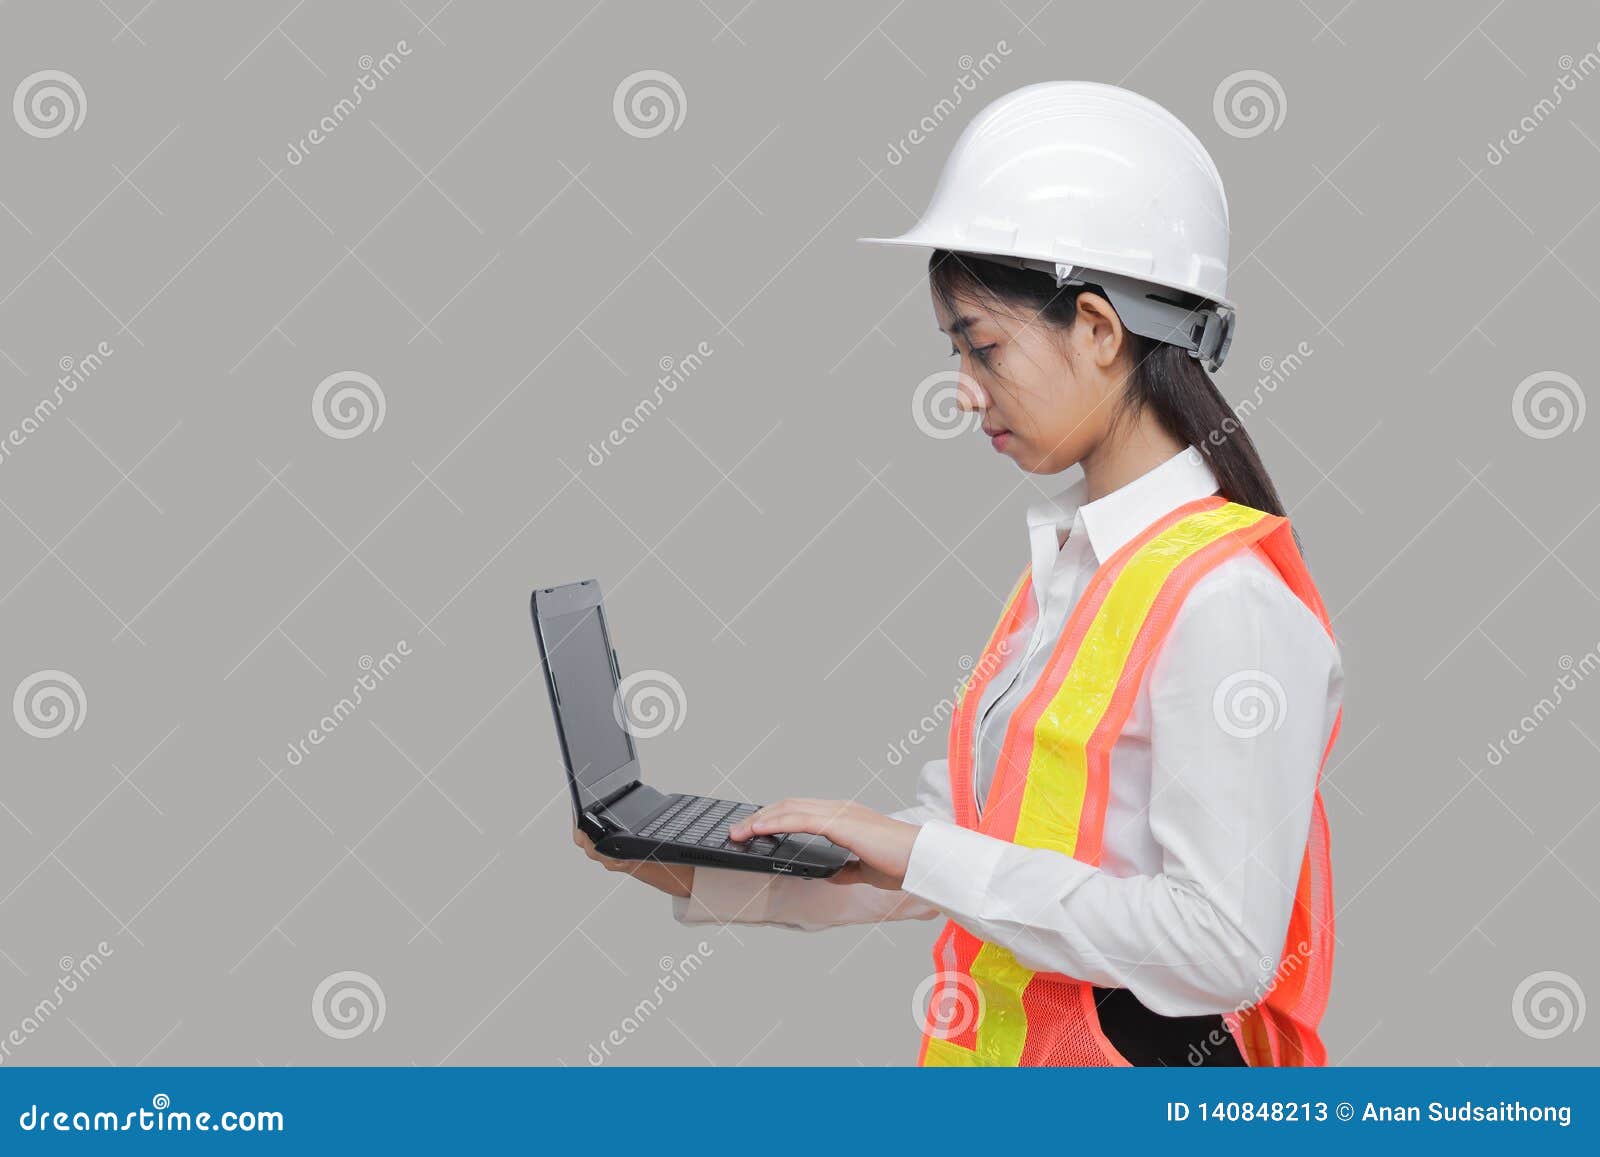 beauty confident young asian worker with safty equipment carrying laptop on gray  background